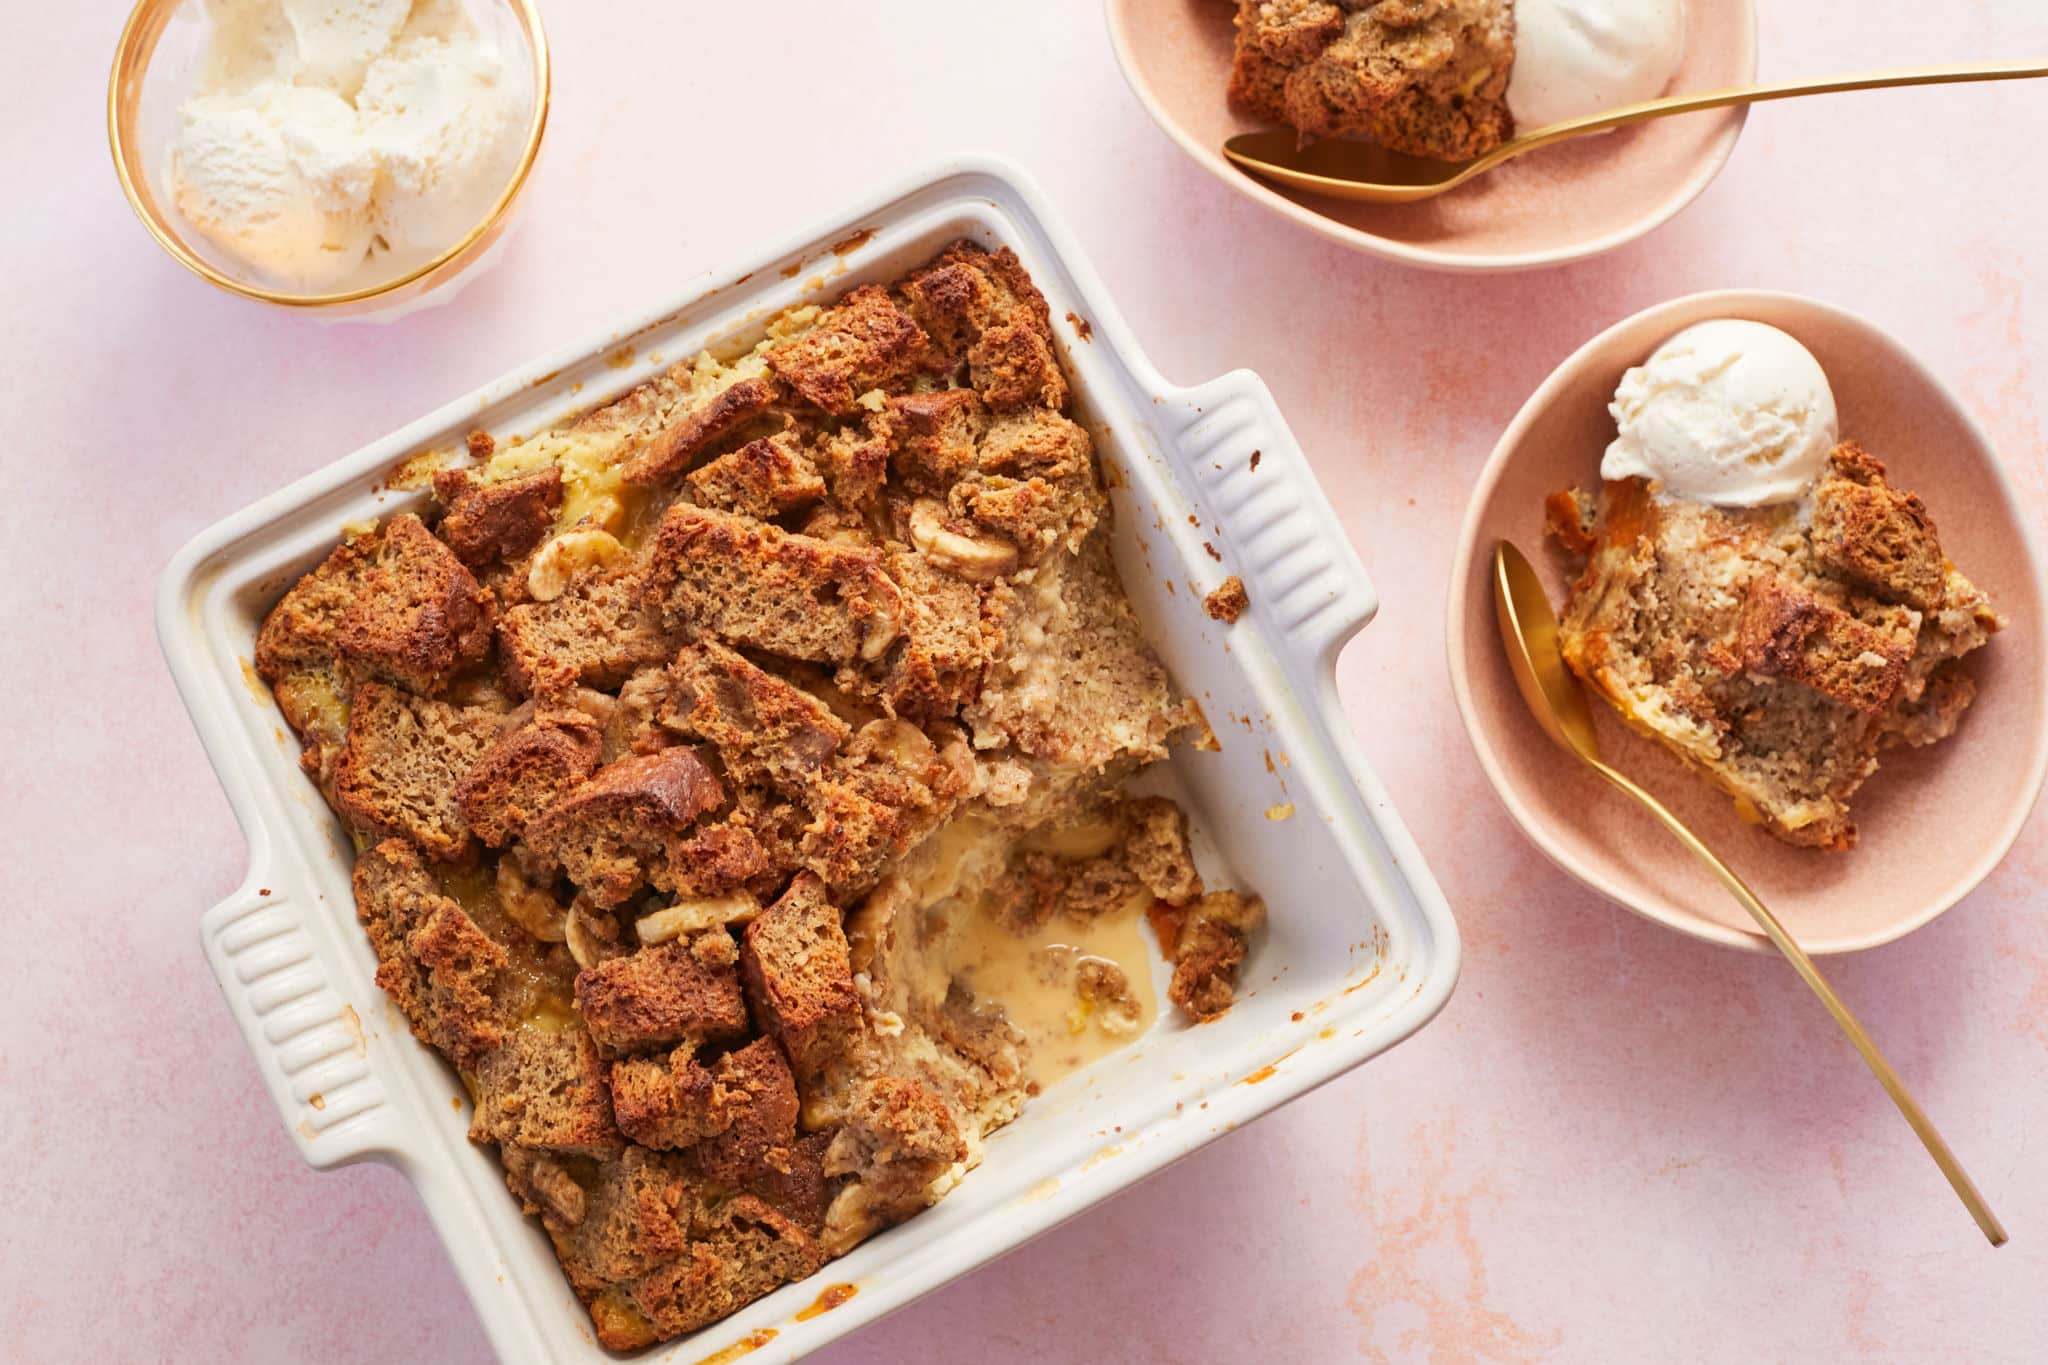 Banana Bread Pudding in a serving dish with two bowls.